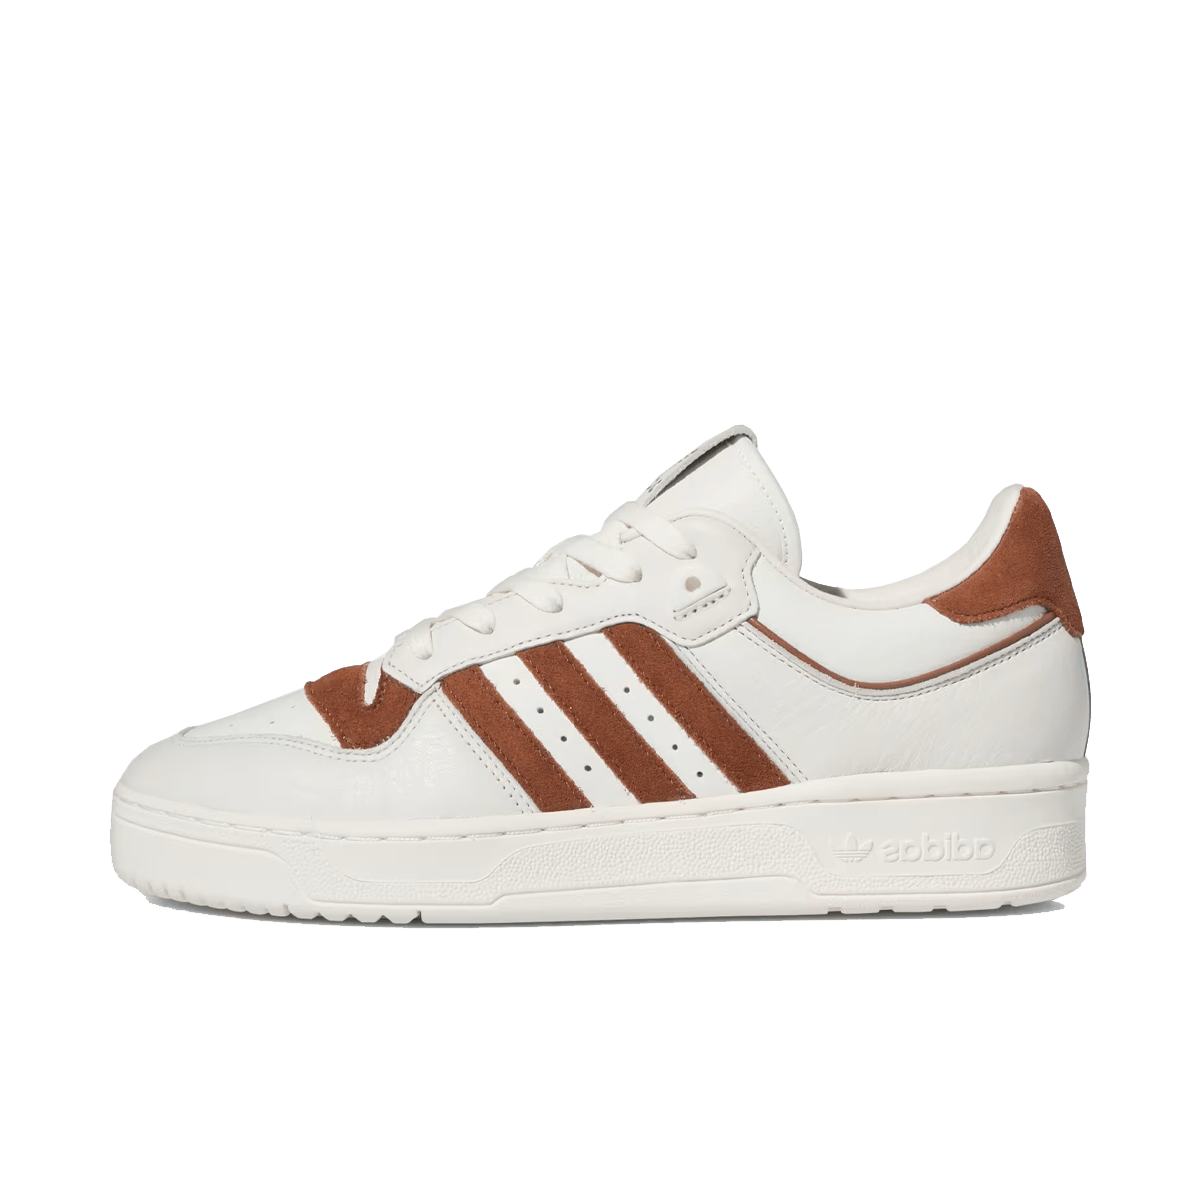 adidas Rivalry 86 Low 'Preloved Brown'